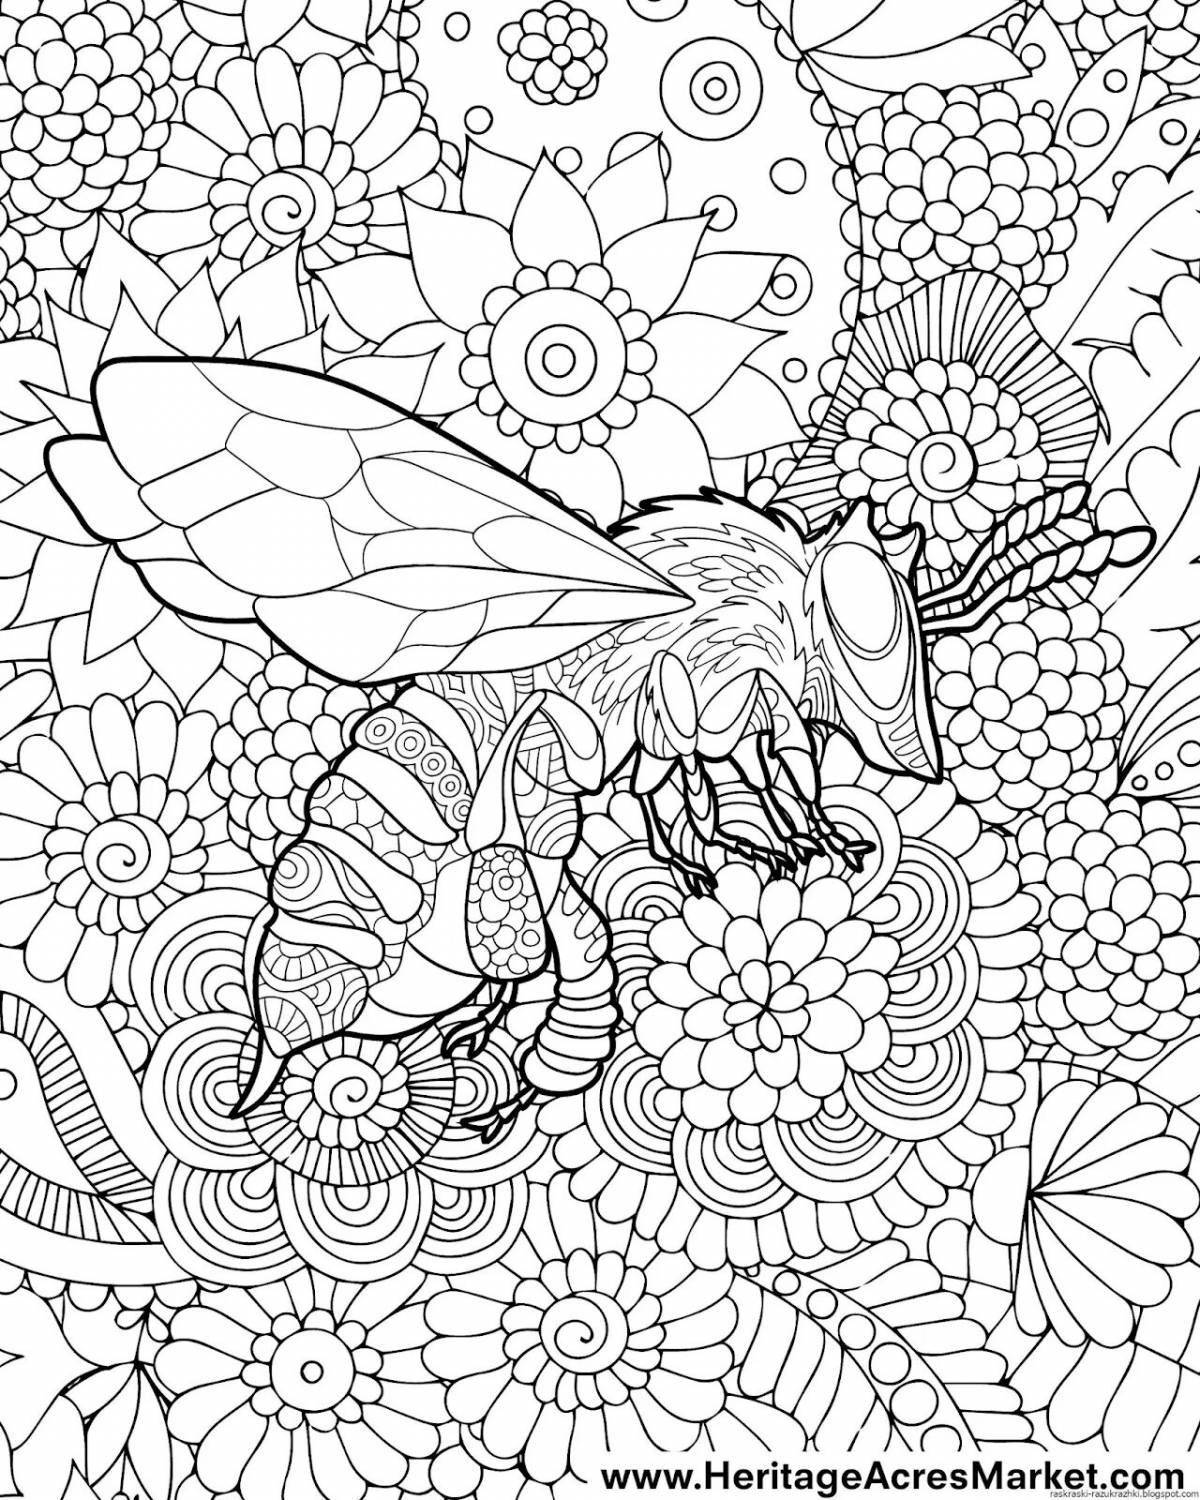 Relaxing anti-stress coloring book for adults